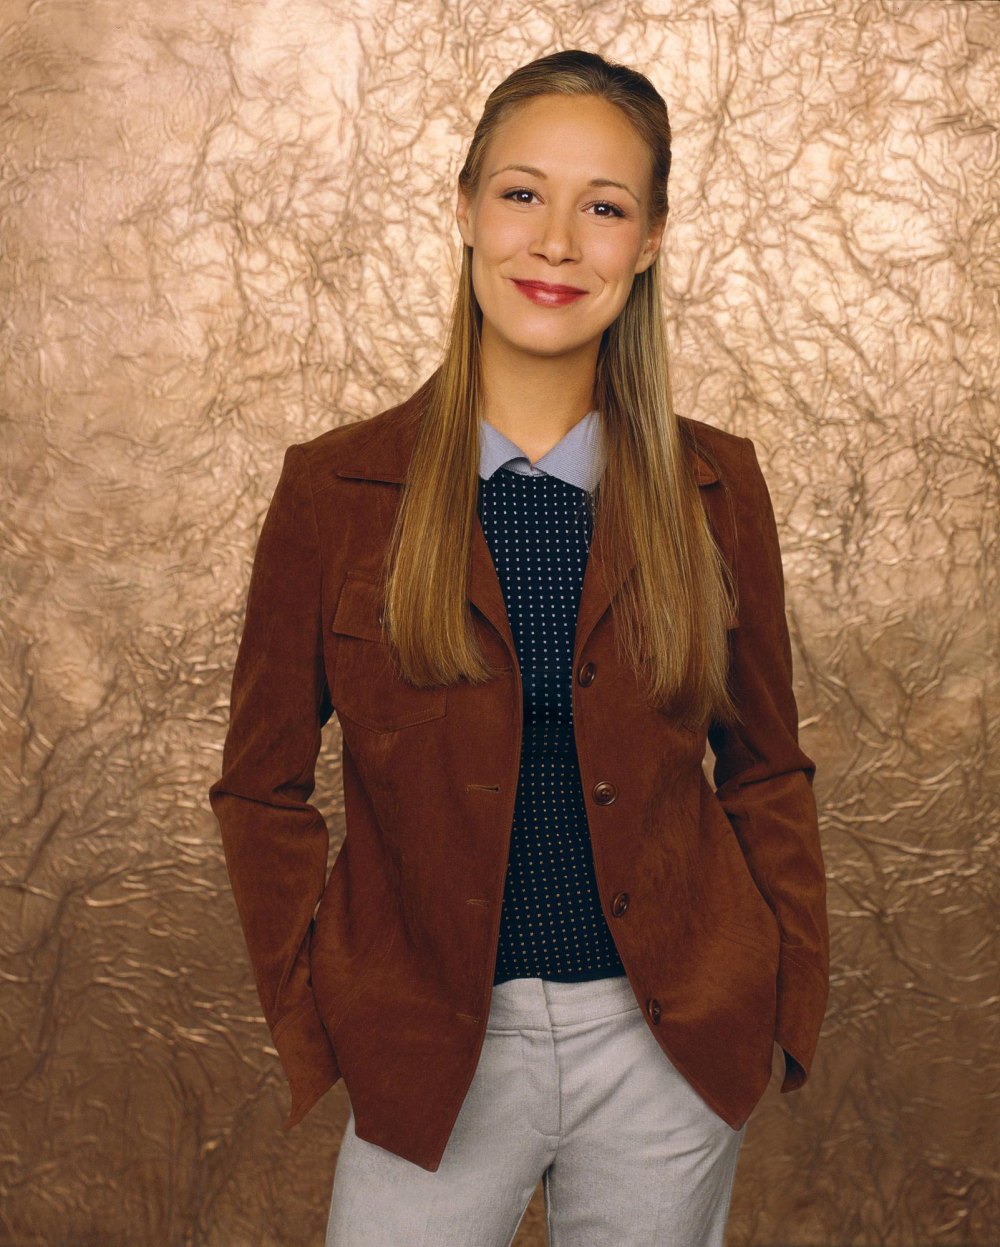 Which Gilmore Girls Character You Are Based on Your Zodiac Sign Paris (Liza Weil) 830